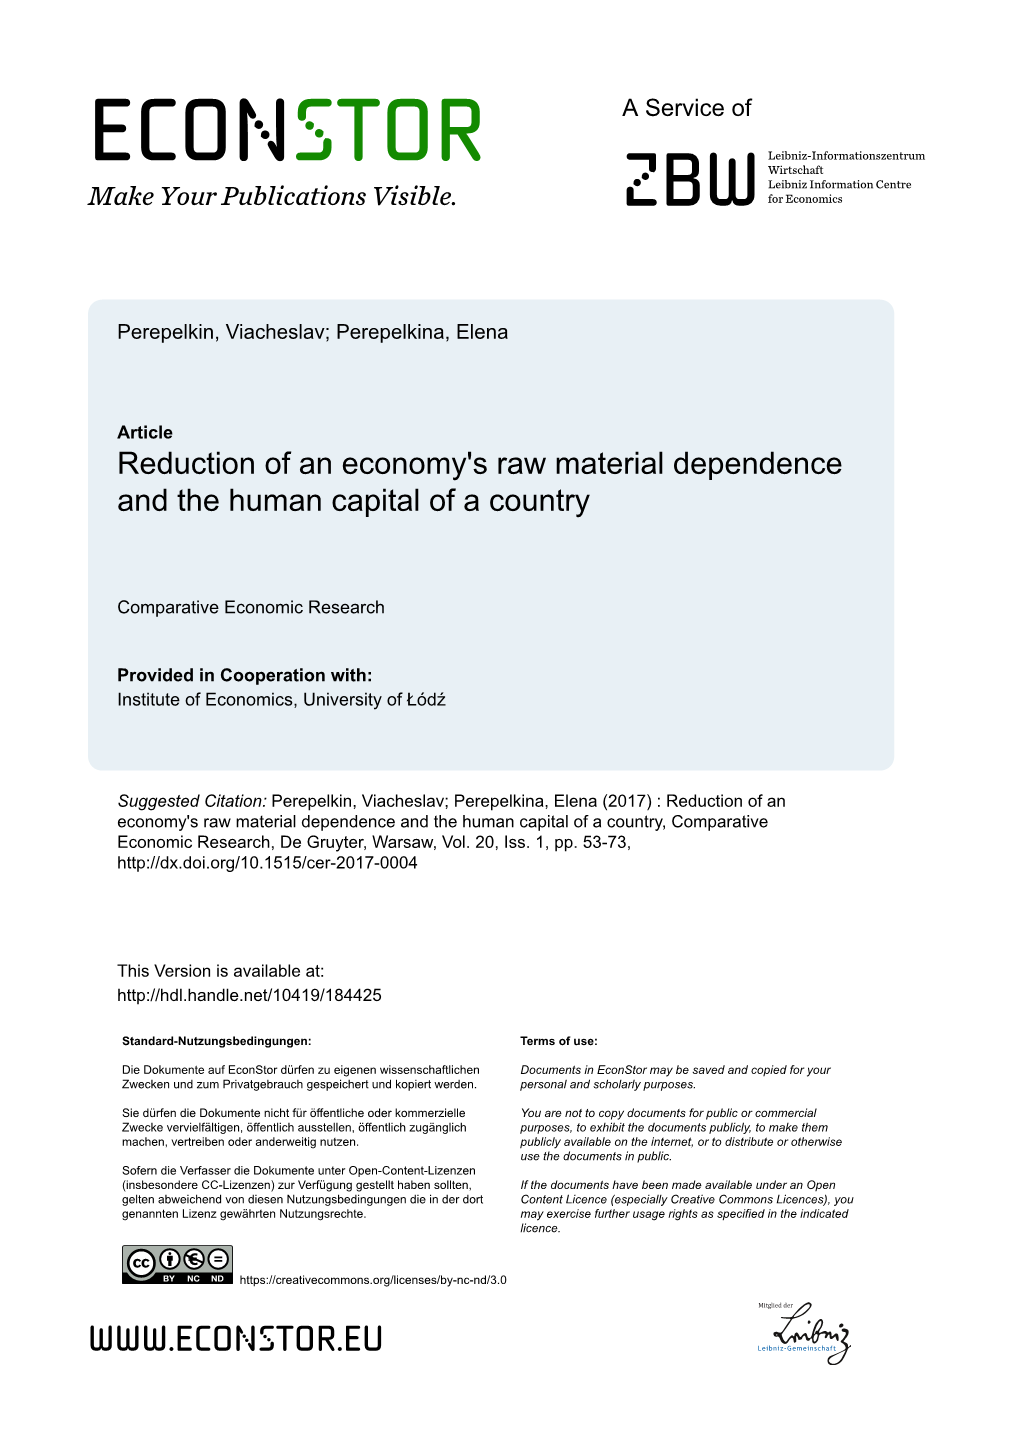 Reduction of an Economy's Raw Material Dependence and the Human Capital of a Country